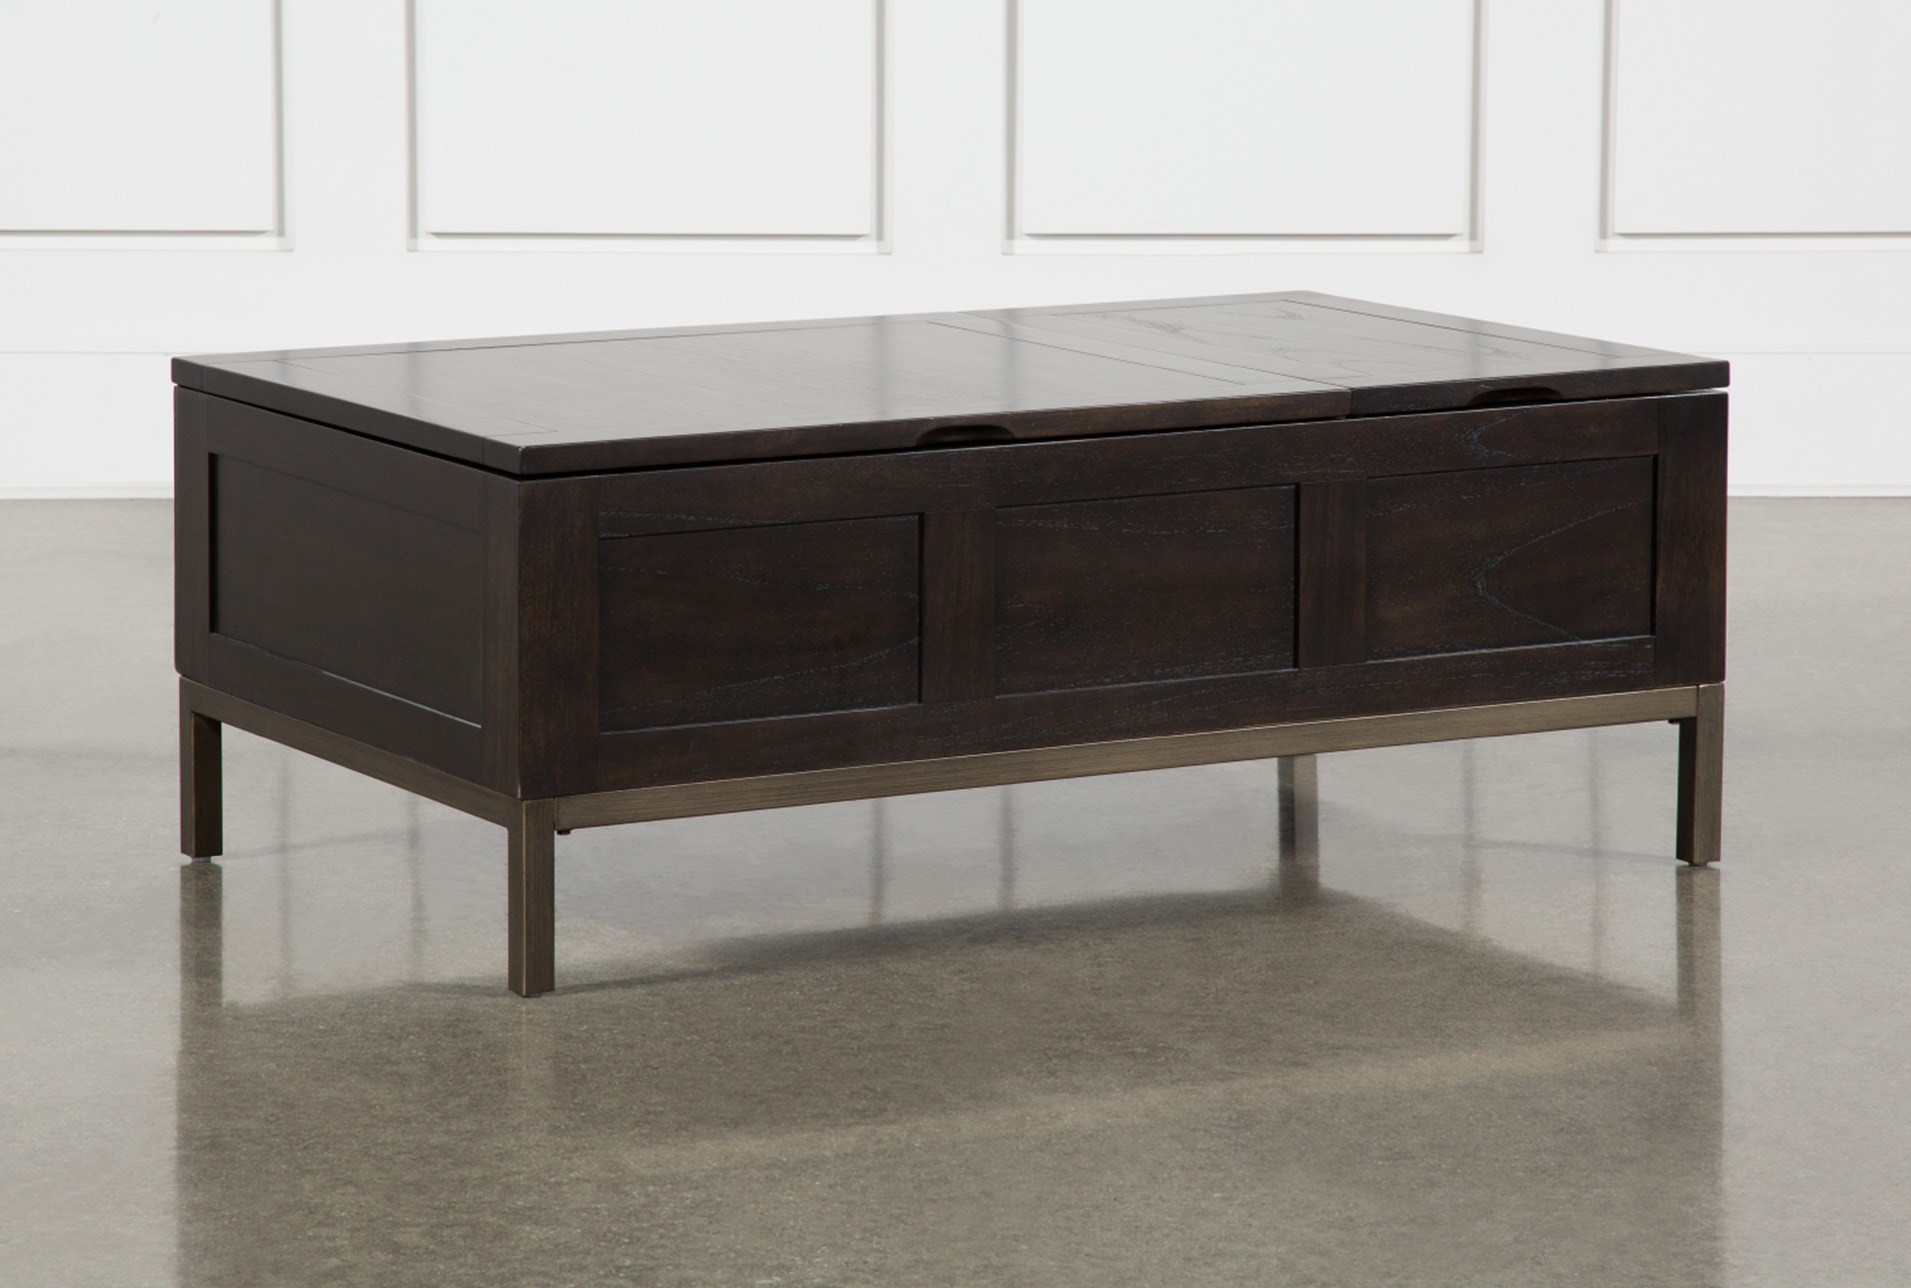 Living Spaces Coffee Table
 Rawlings Lift Top Coffee Table